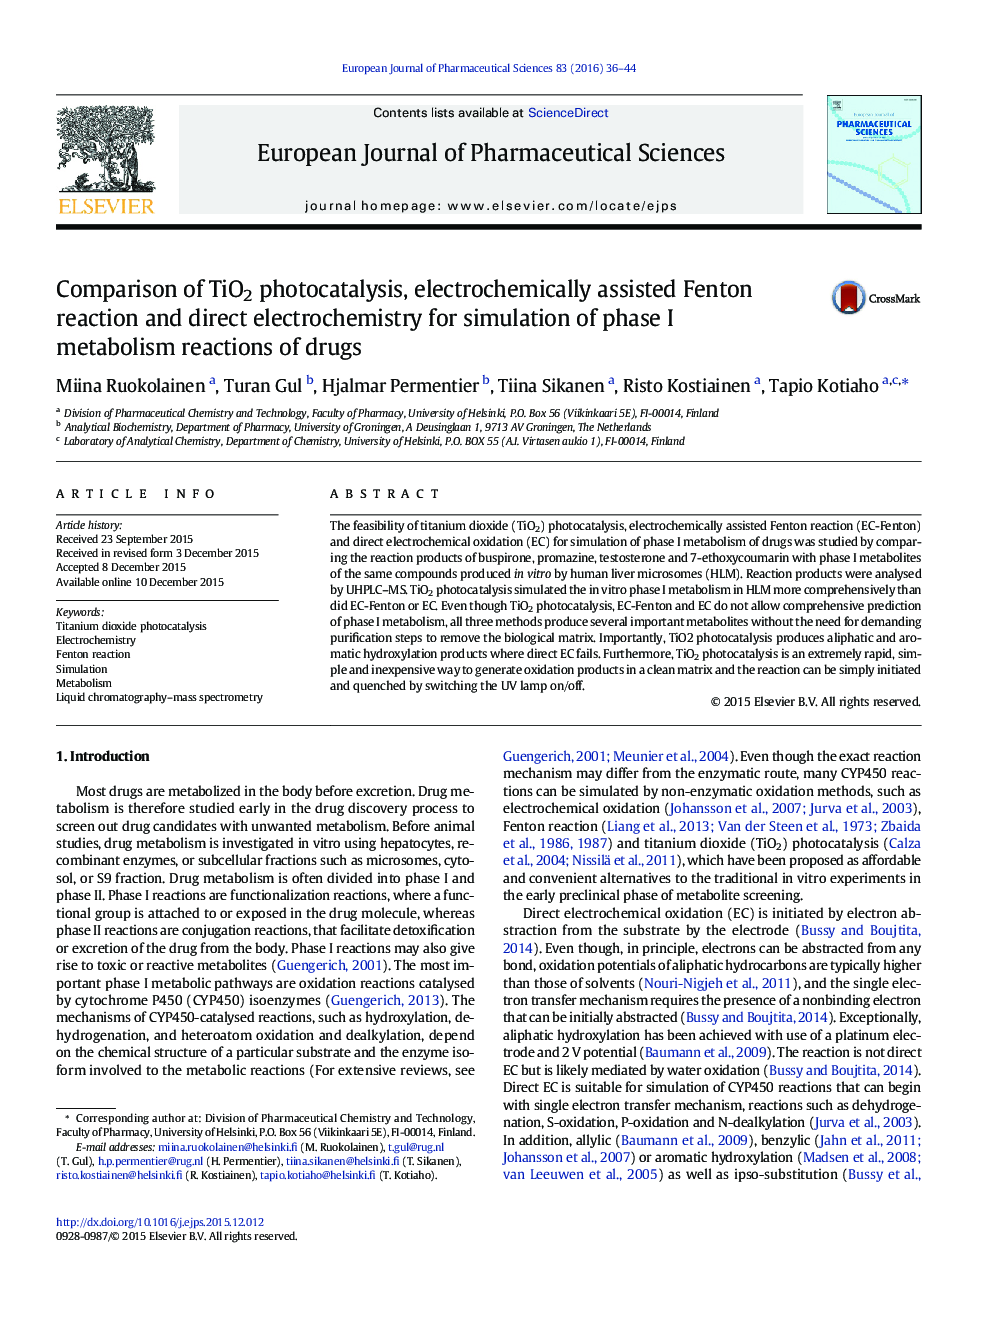 Comparison of TiO2 photocatalysis, electrochemically assisted Fenton reaction and direct electrochemistry for simulation of phase I metabolism reactions of drugs